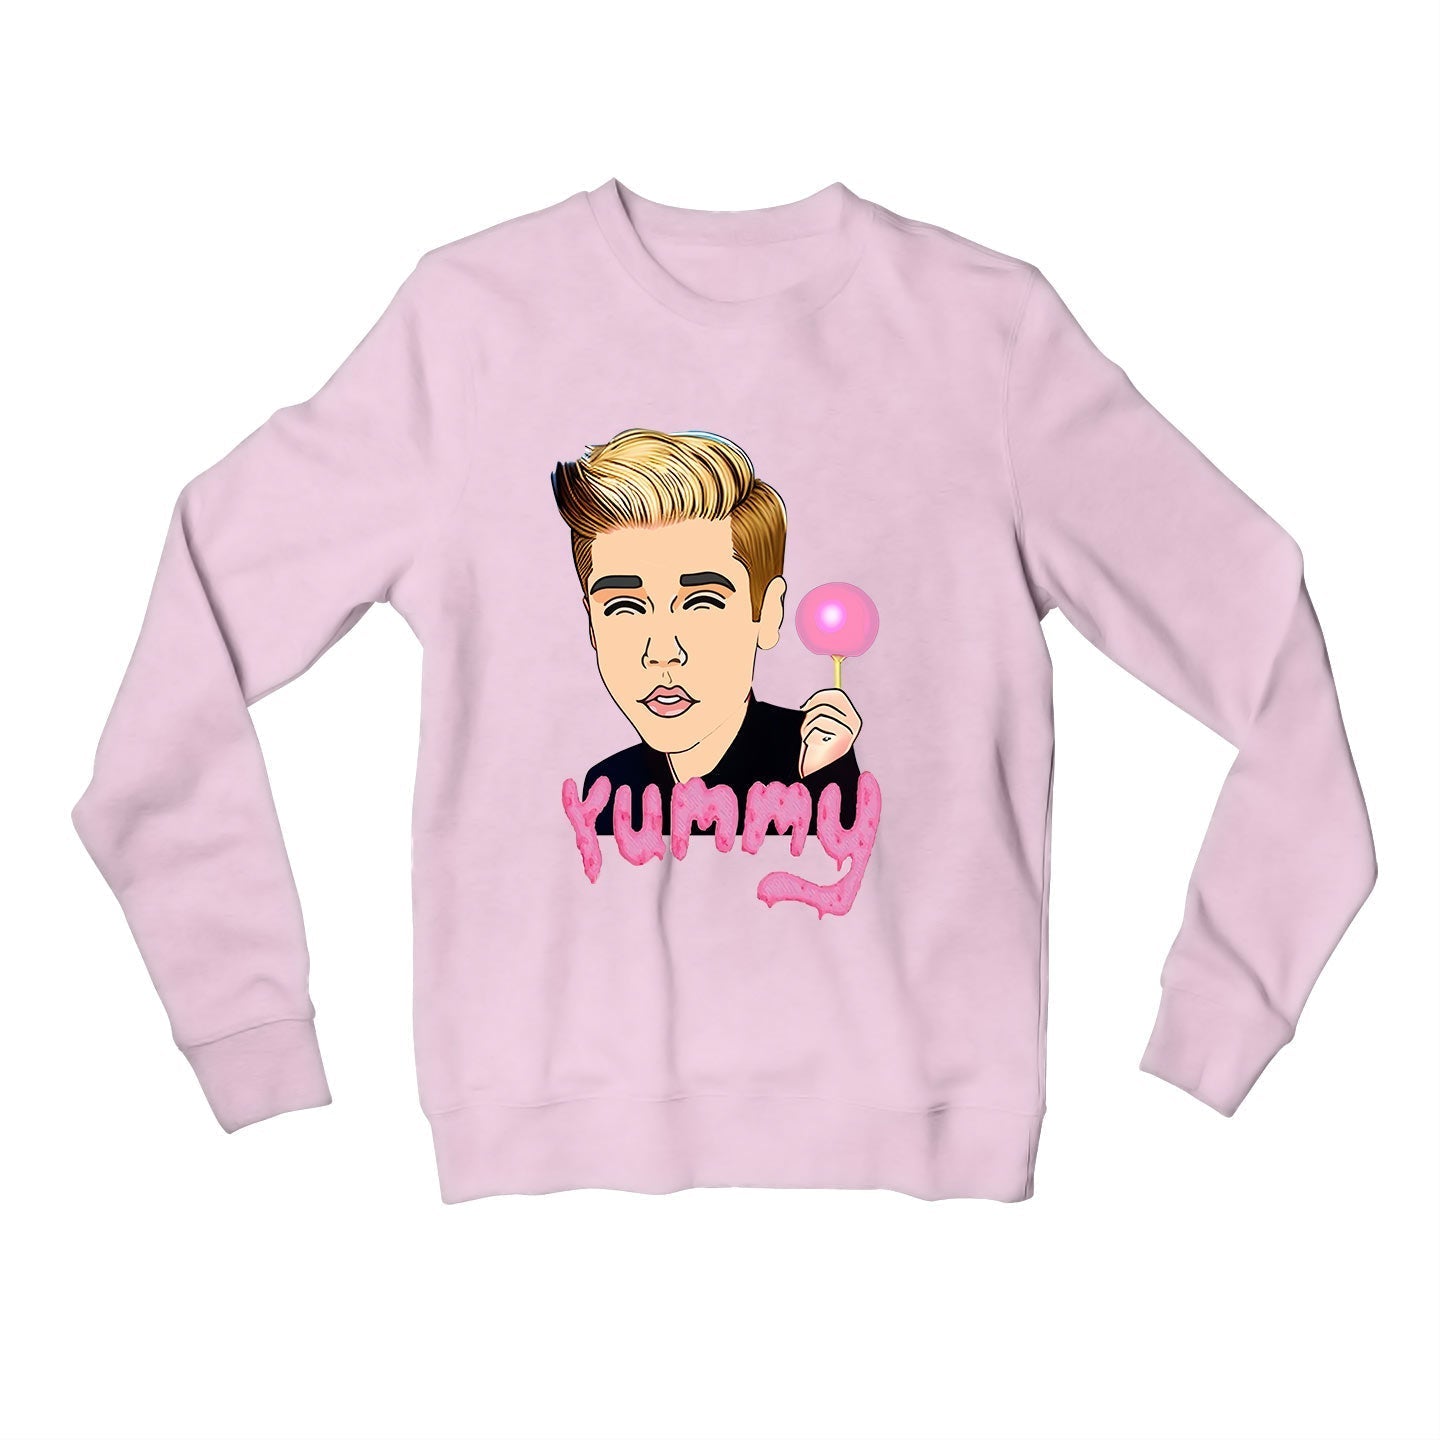 Buy Justin Bieber Sweatshirt - Where Are You Now at 5% OFF 🤑 – The Banyan  Tee